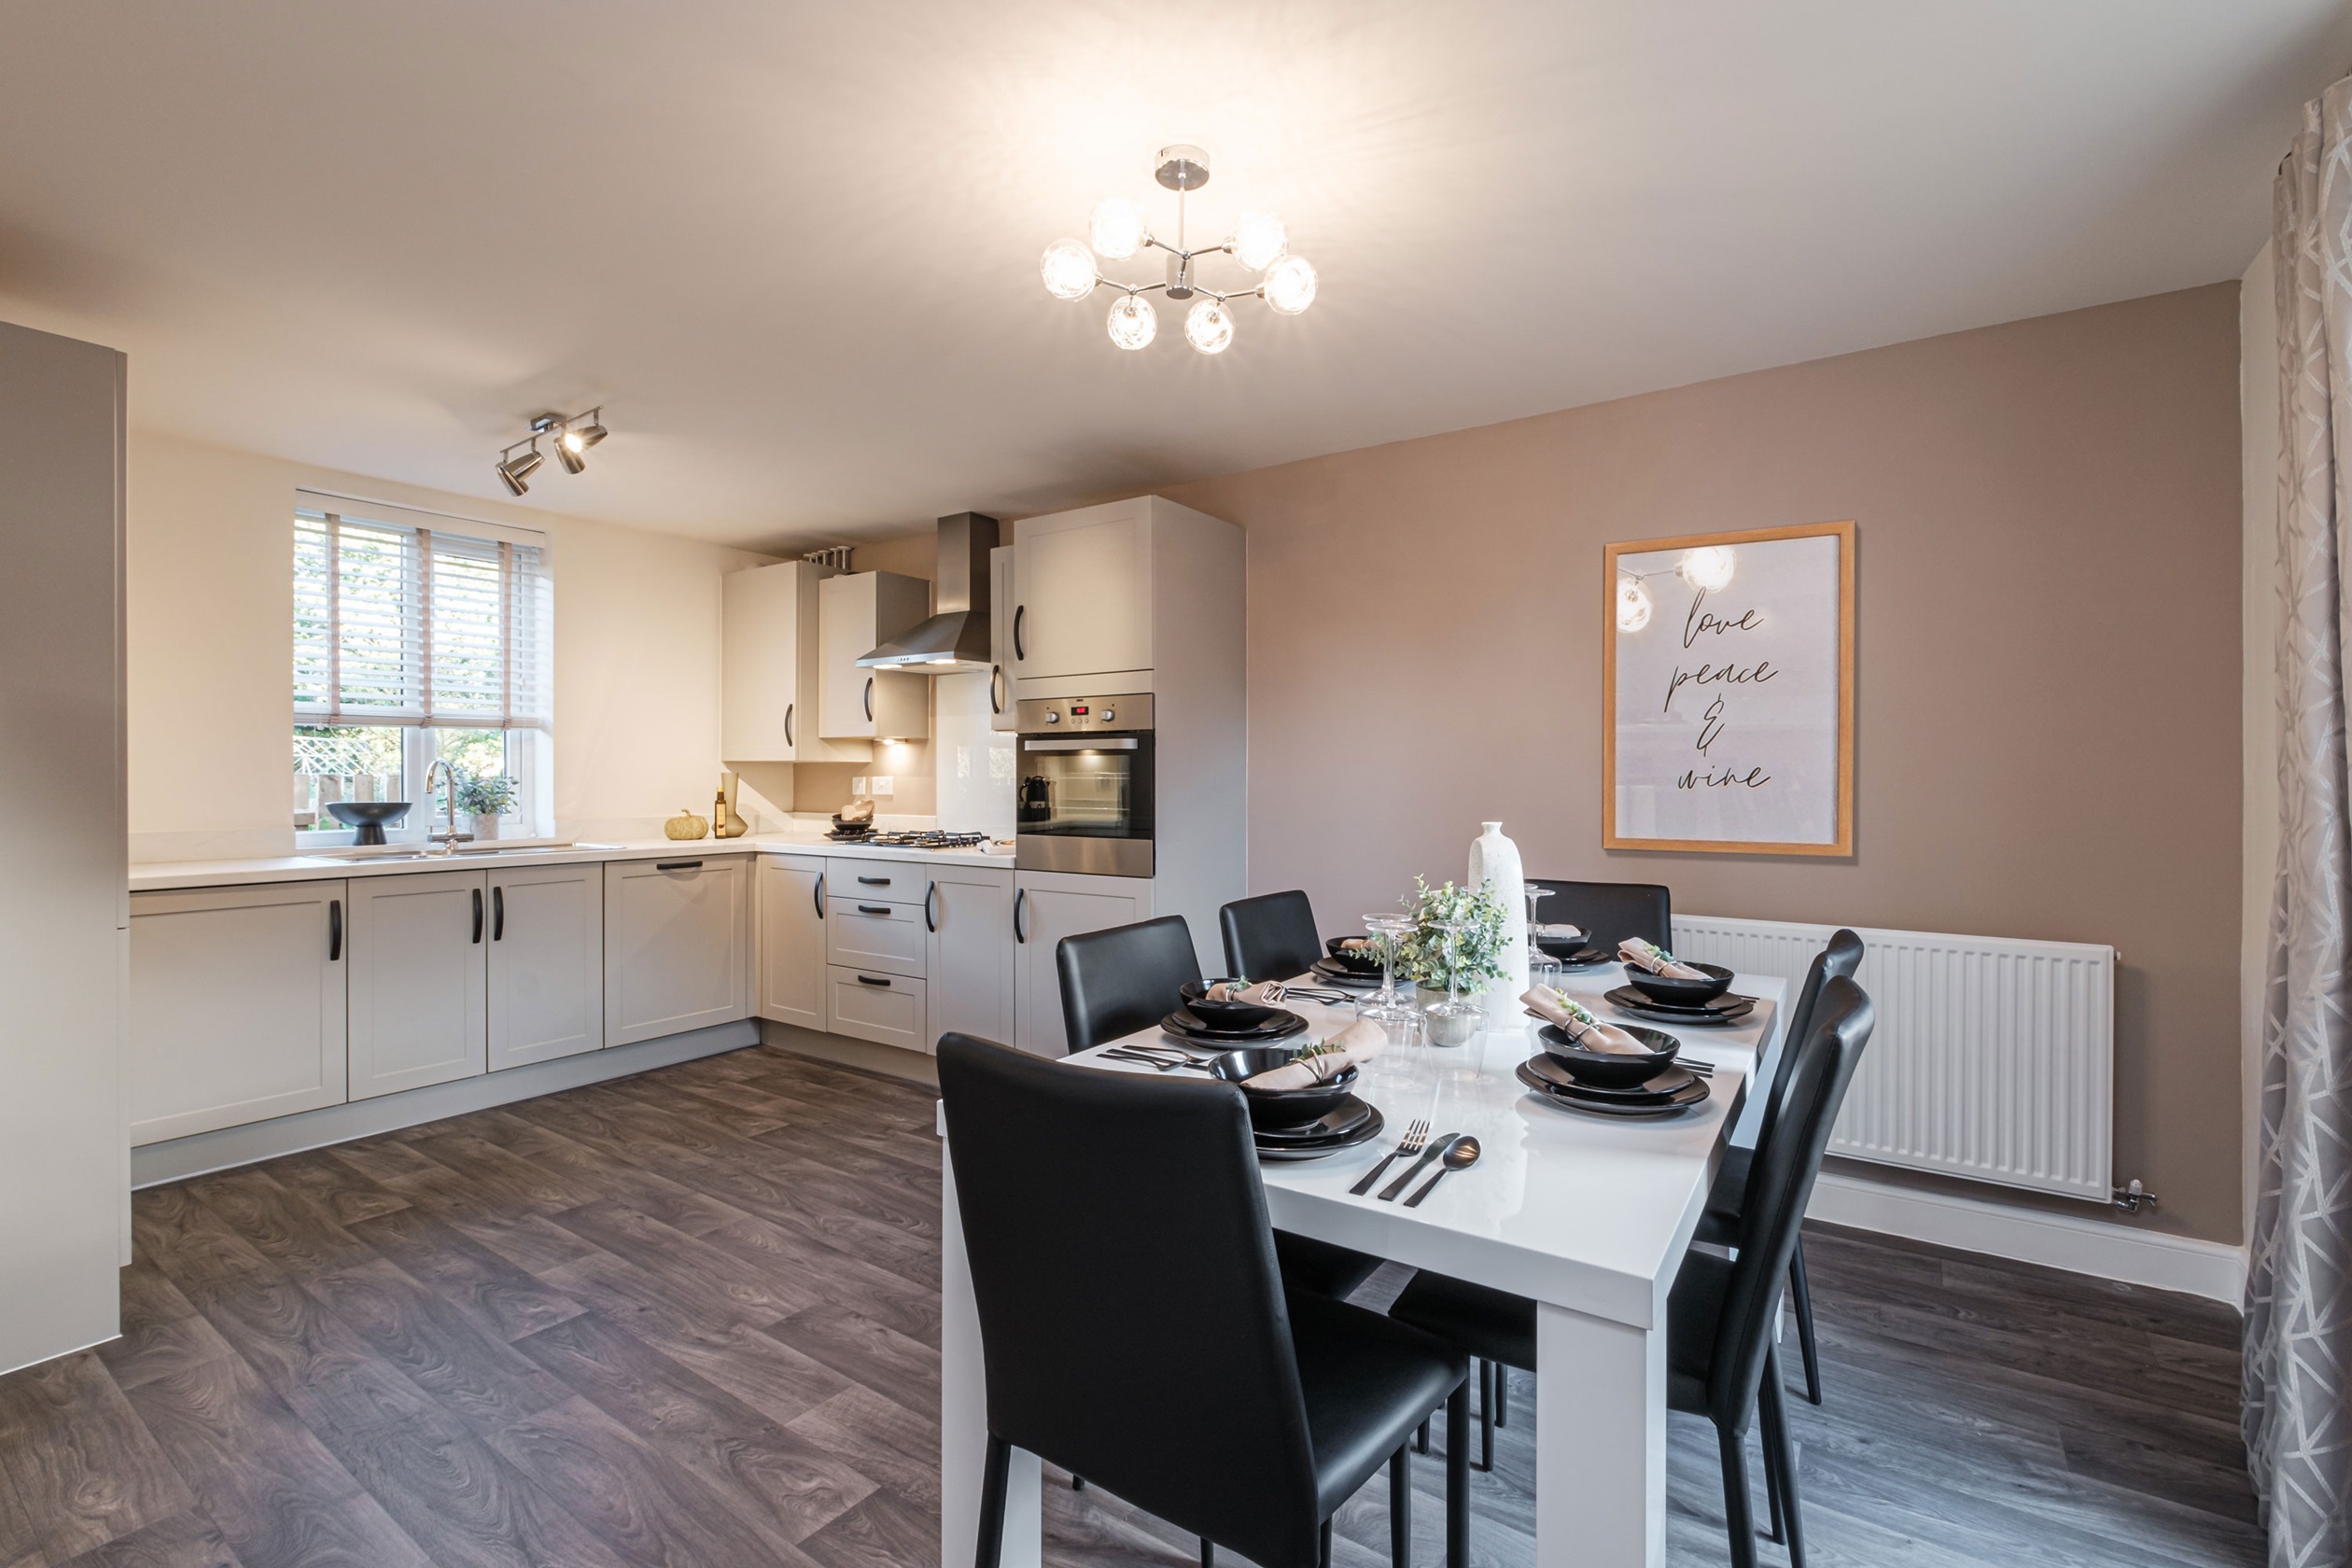 Property 2 of 9. Interior View Of Kitchen Diner In Our Lutterworth 3 Bedroom Home